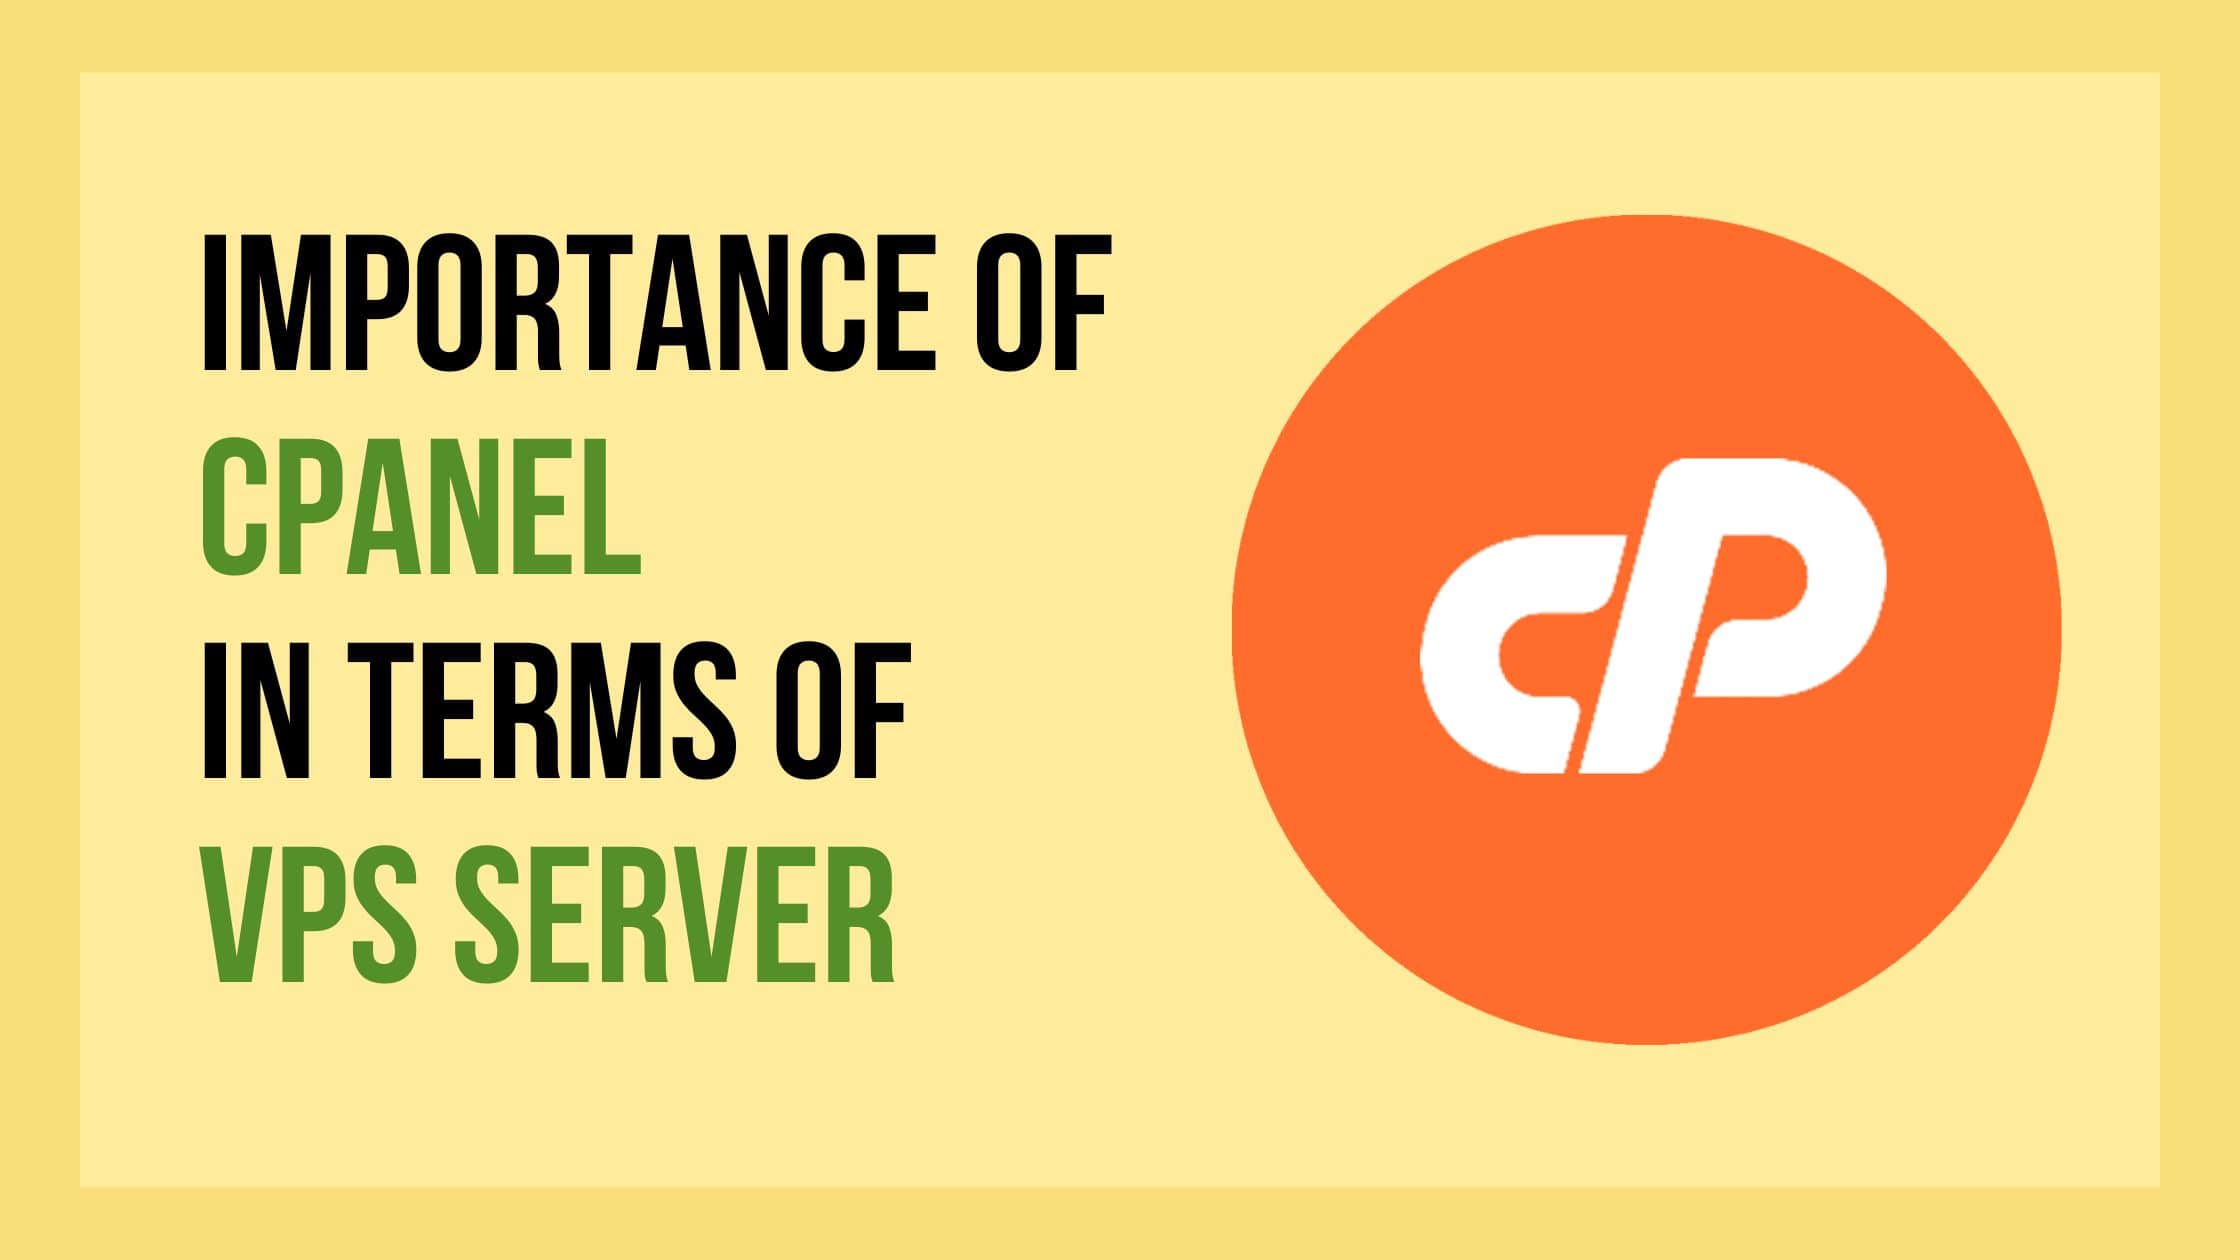 Importance Of Cpanel In Terms Of VPS Server